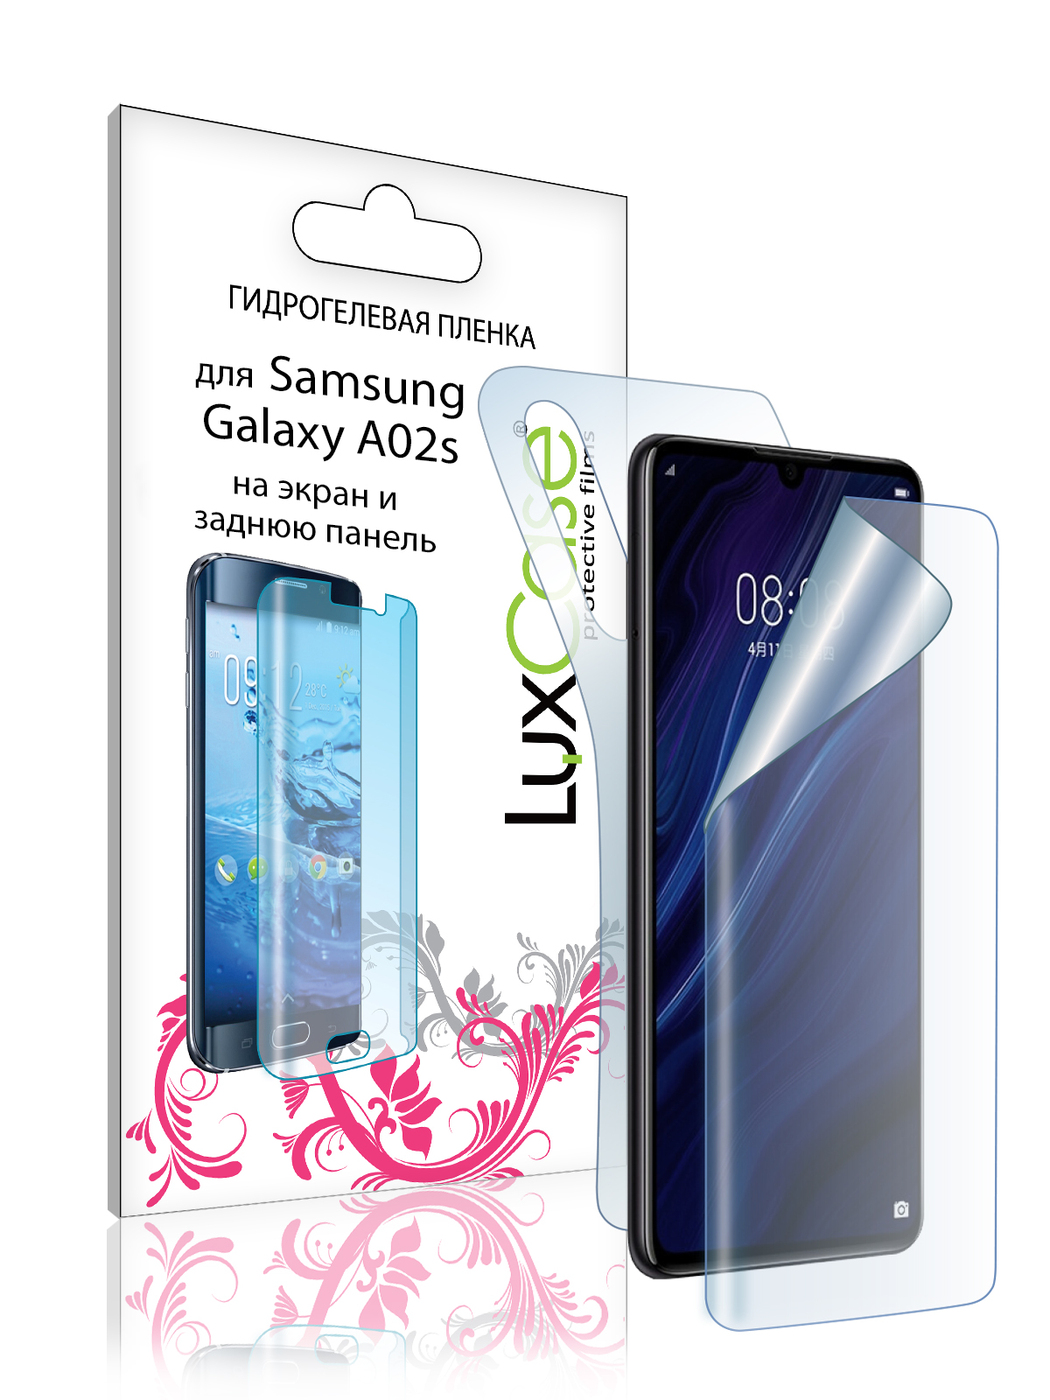 Пленка гидрогелевая LuxCase для Samsung Galaxy A02s 0.14mm Front and Back Transparent 86185 гидрогелевая пленка luxcase для samsung galaxy a03s 0 14mm transparent front and back 89728